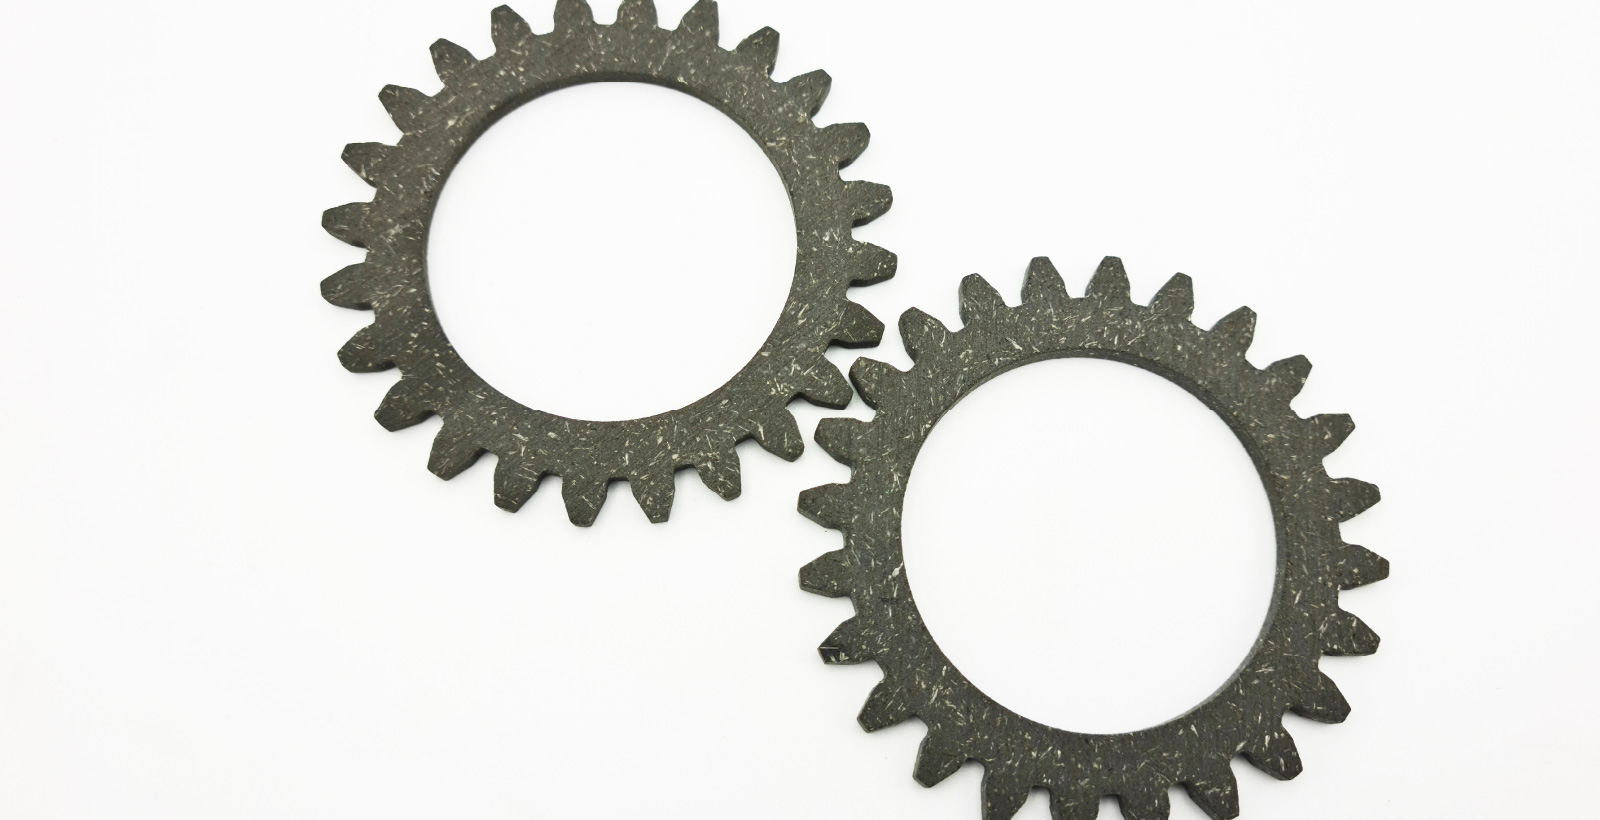 Gear Cut Discs for Agricultural Industry